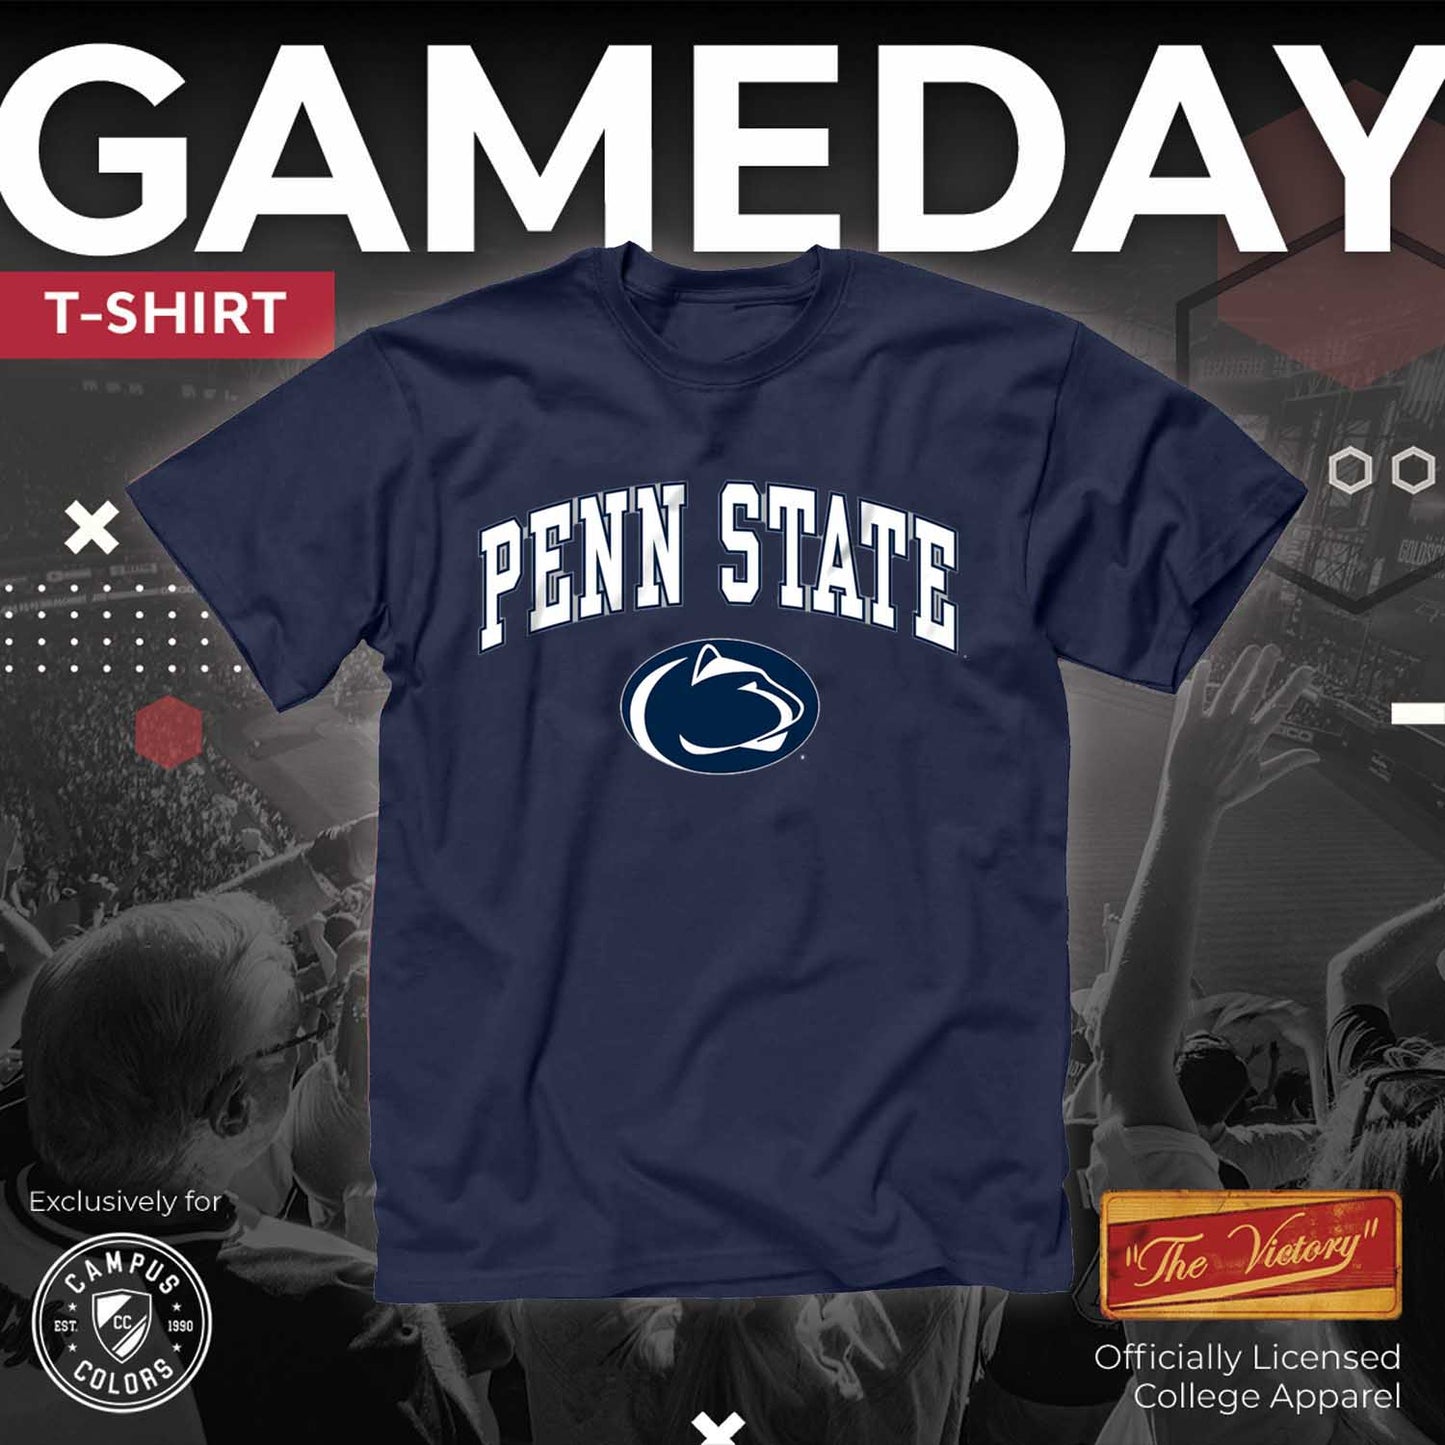 Penn State Nittany Lions NCAA Adult Gameday Cotton T-Shirt - Navy